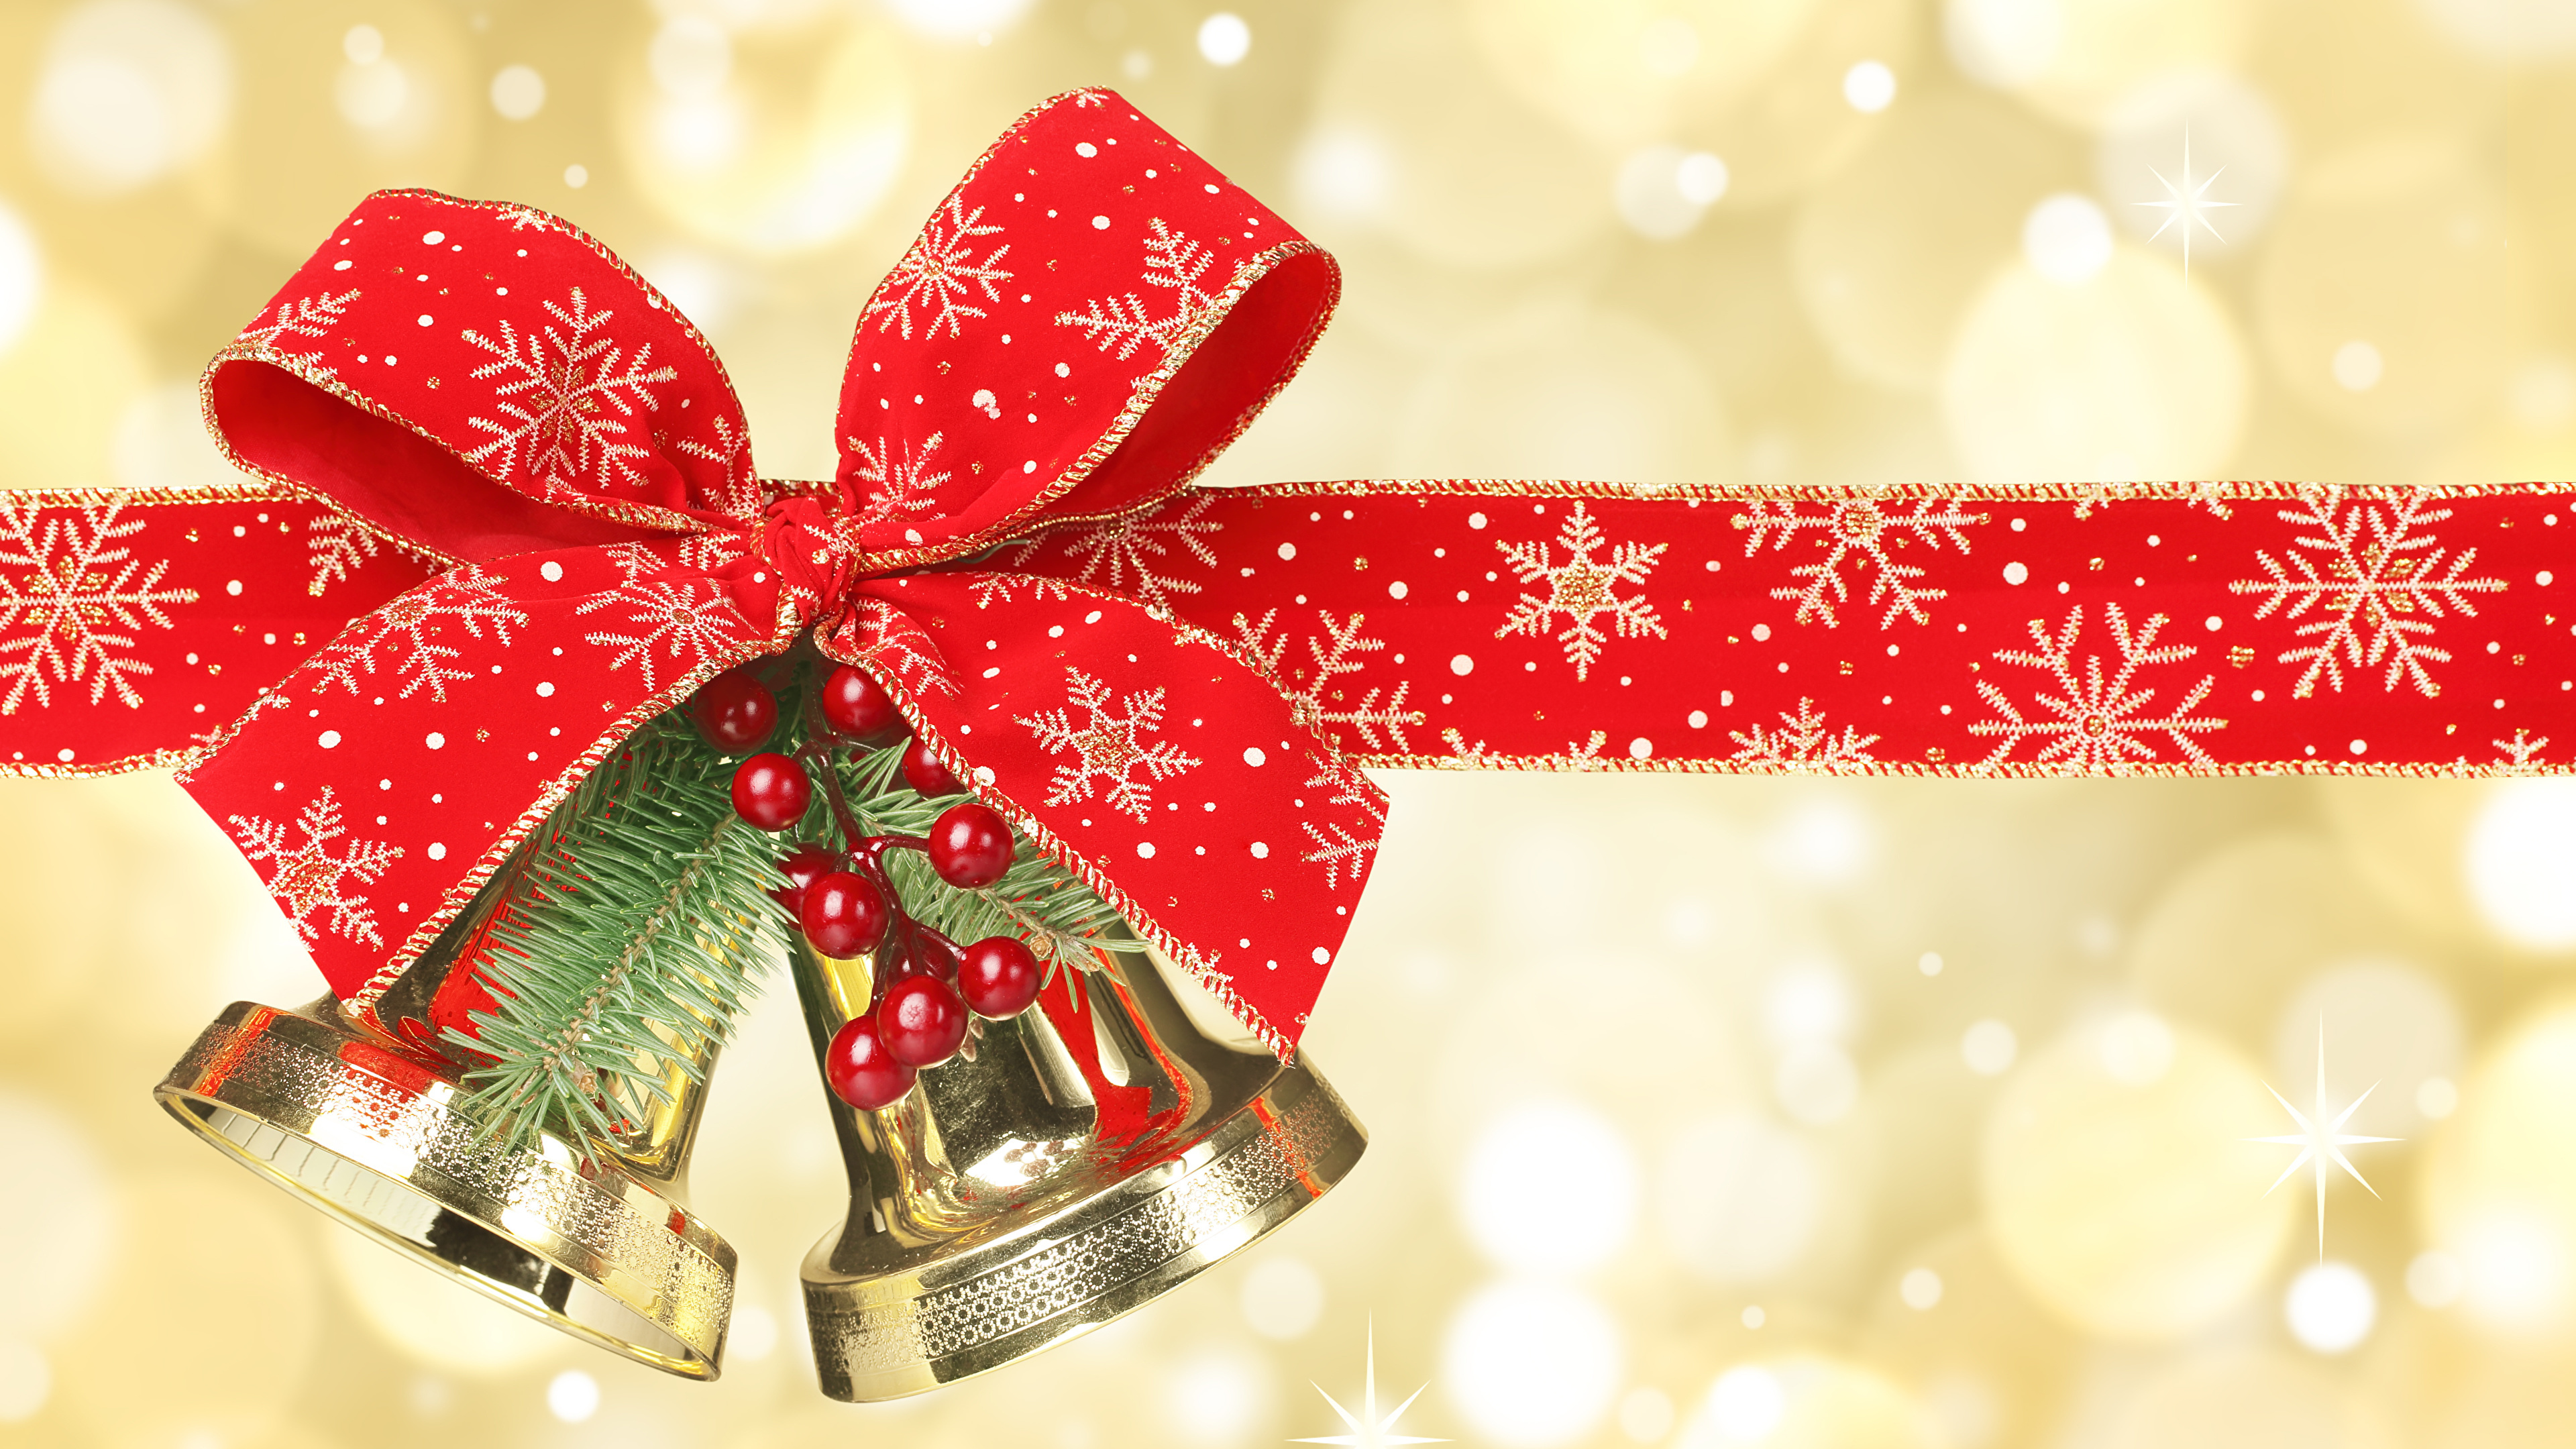 Christmas Day, New Year, Holiday, Christmas Ornament, Christmas Decoration. Wallpaper in 3840x2160 Resolution